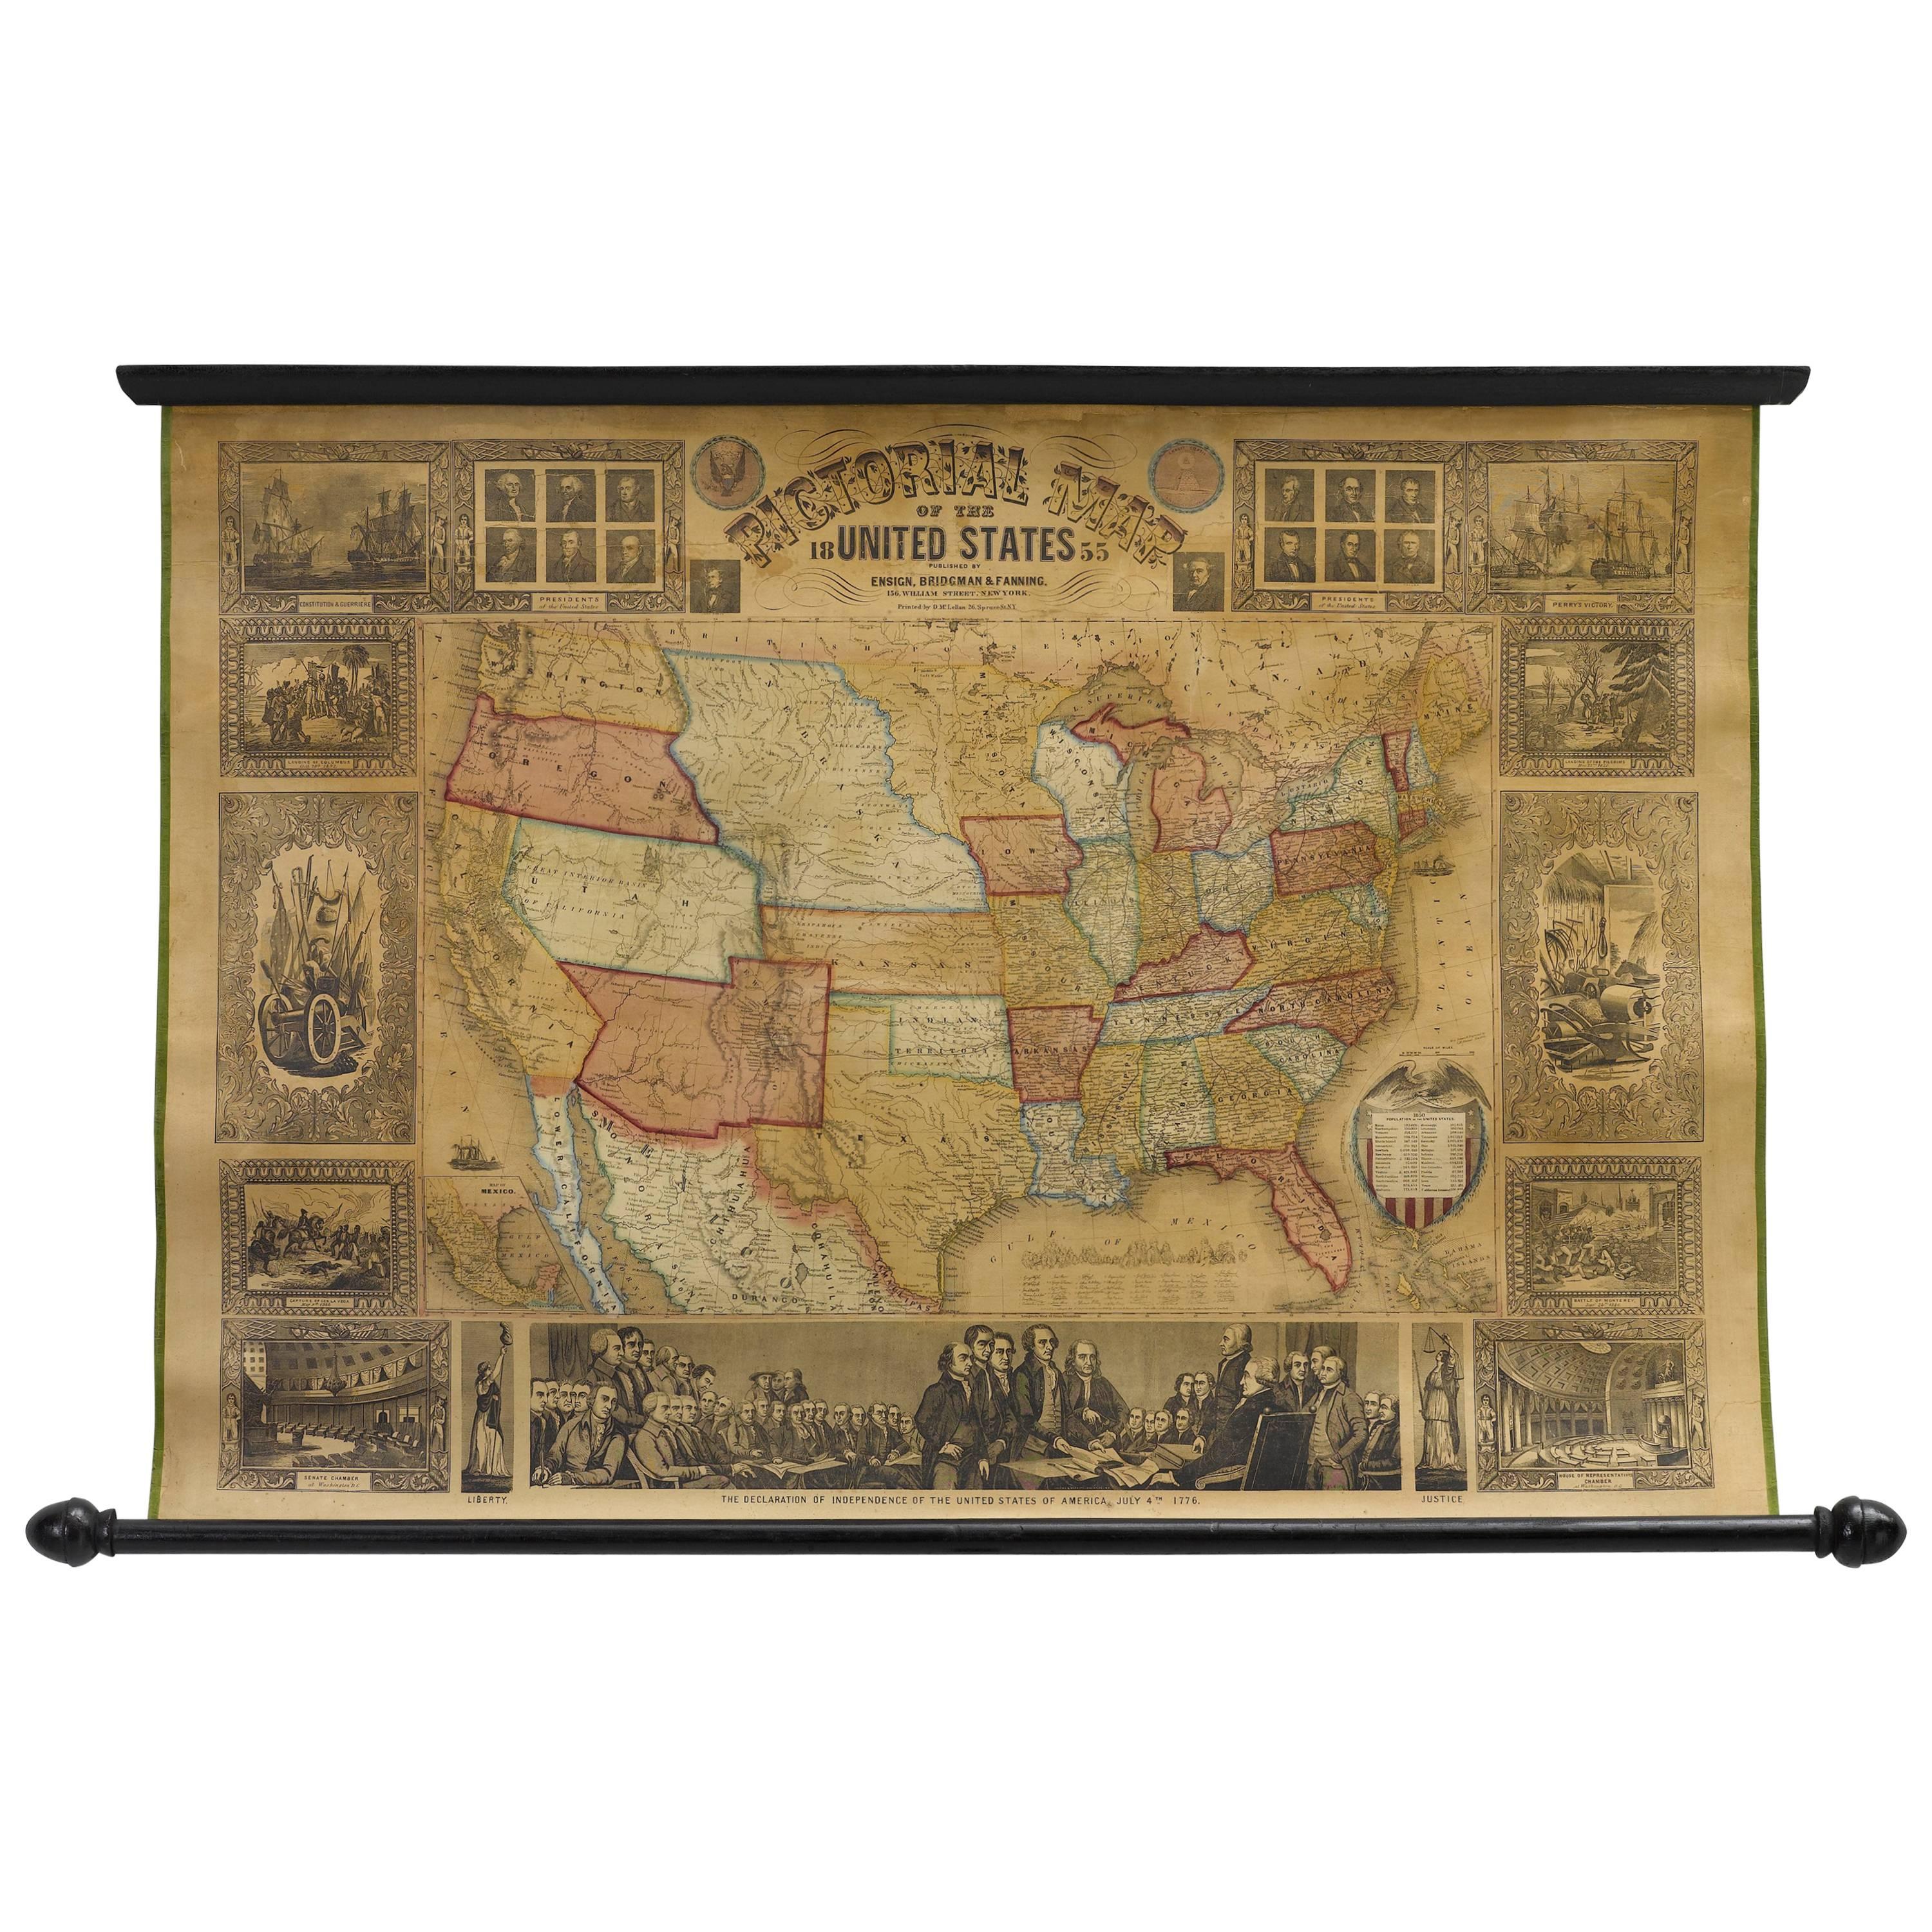 1855 Pictorial Map of the United States, Pub by Ensign, Bridgman & Fanning